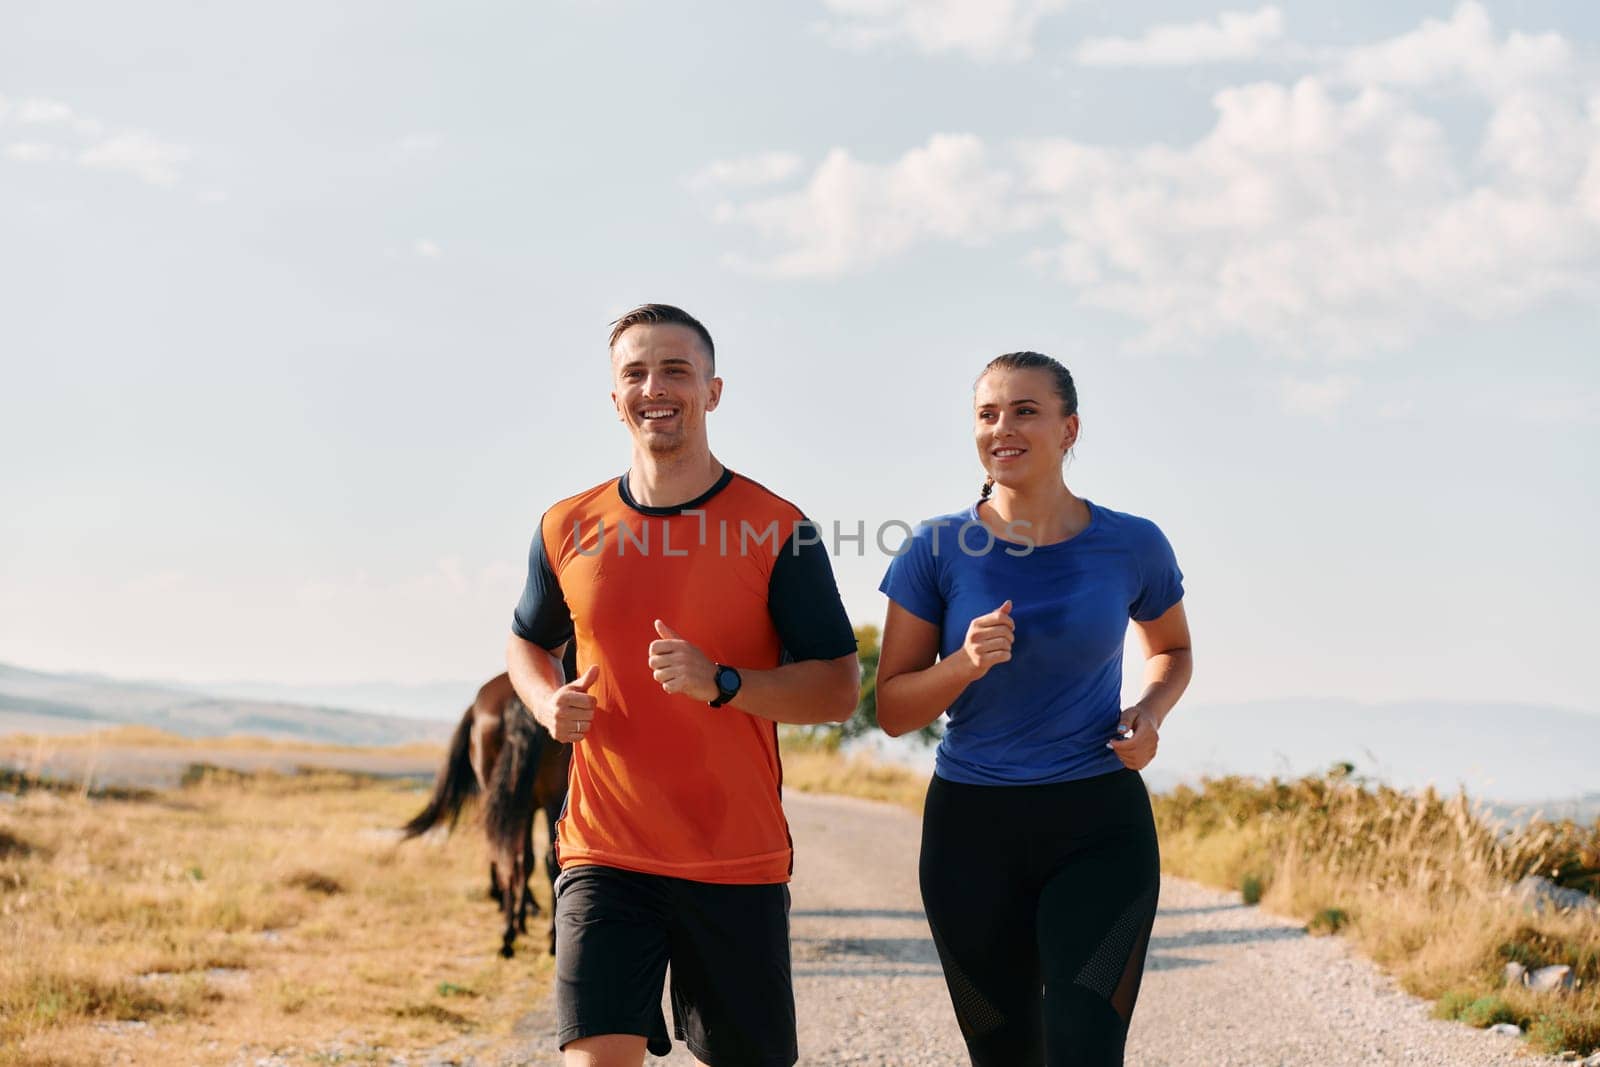 A couple dressed in sportswear runs along a scenic road during an early morning workout, enjoying the fresh air and maintaining a healthy lifestyle by dotshock